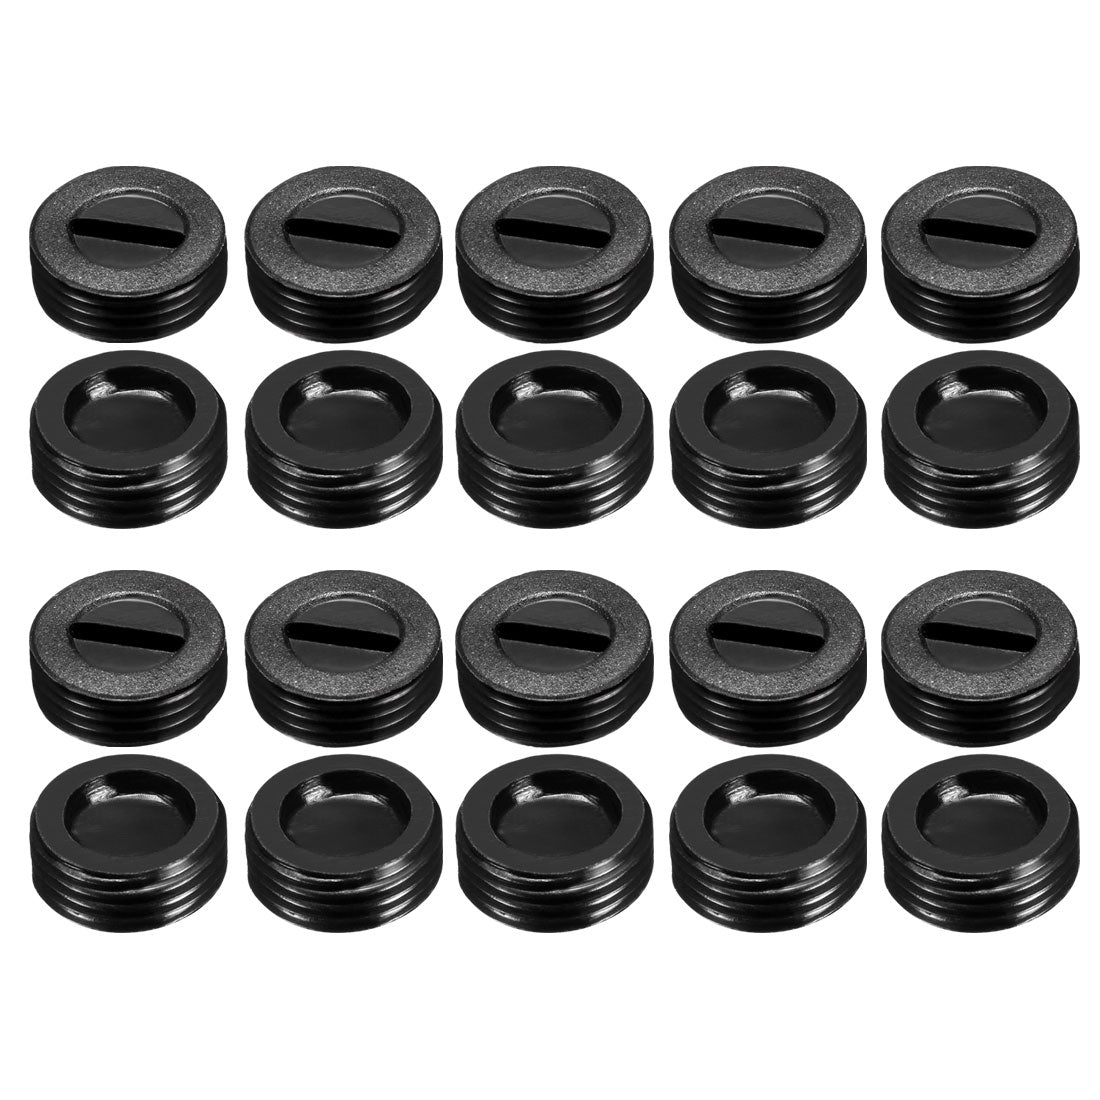 uxcell Uxcell Carbon Brush Holder Caps 12mm O.D. 5mm Thickness Motor Brush Cover Plastic Fitting Thread Black 20pcs